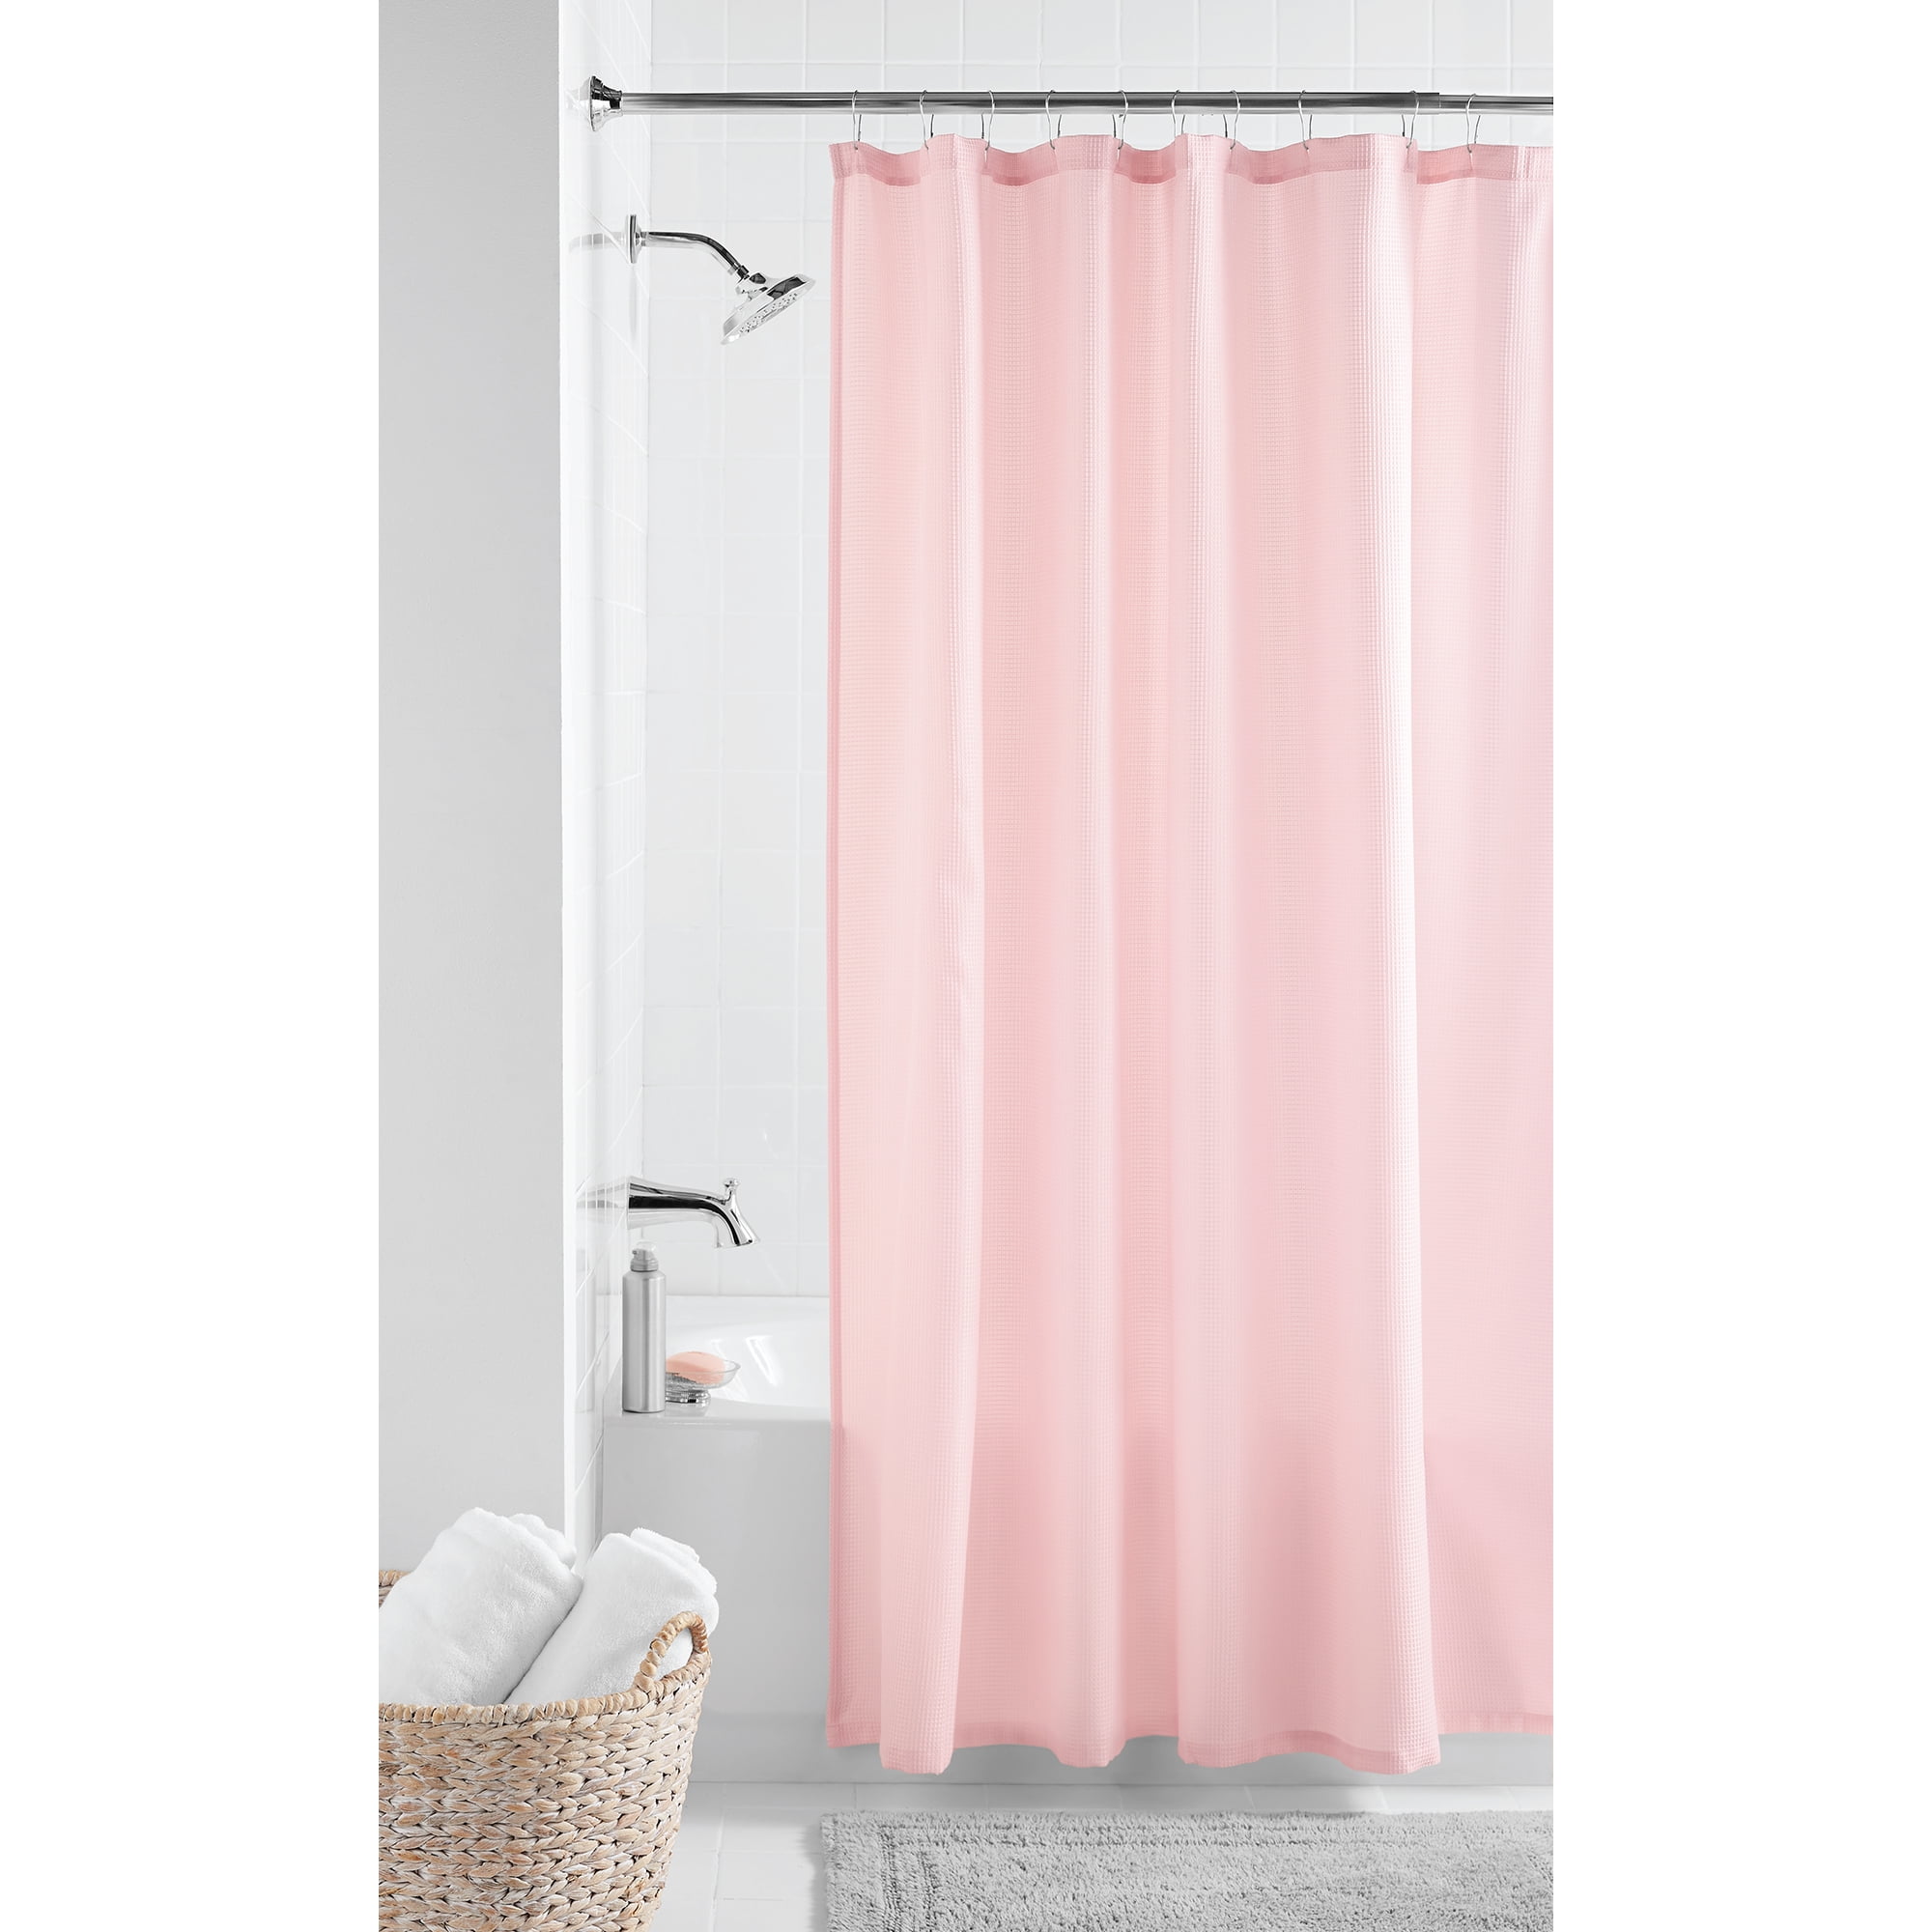 Pink Fabric Shower Curtain 70 X 72, Pink And White Chevron Shower Curtain